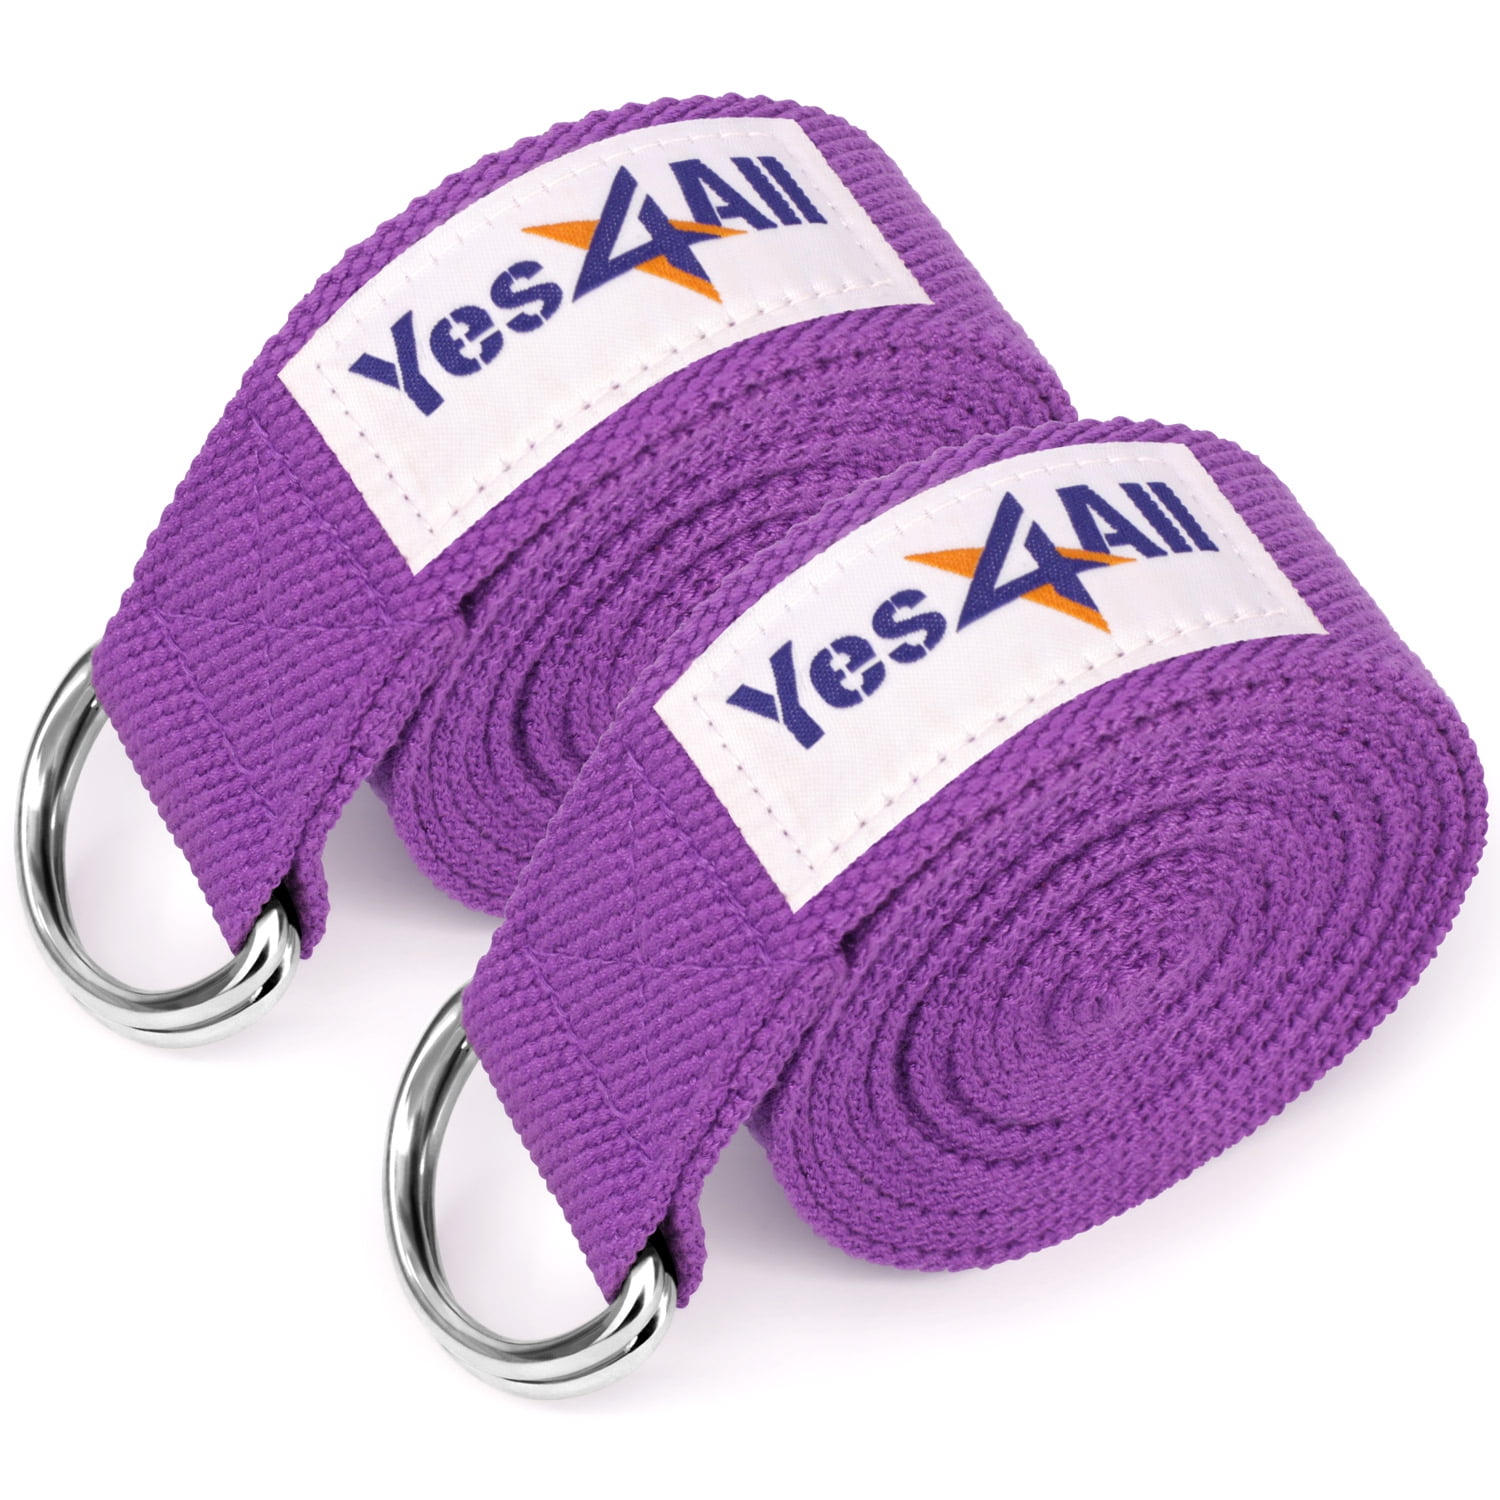 Fit Spirit 10 ft Gym Fitness Exercise Yoga Strap with D-Ring for Stretching 